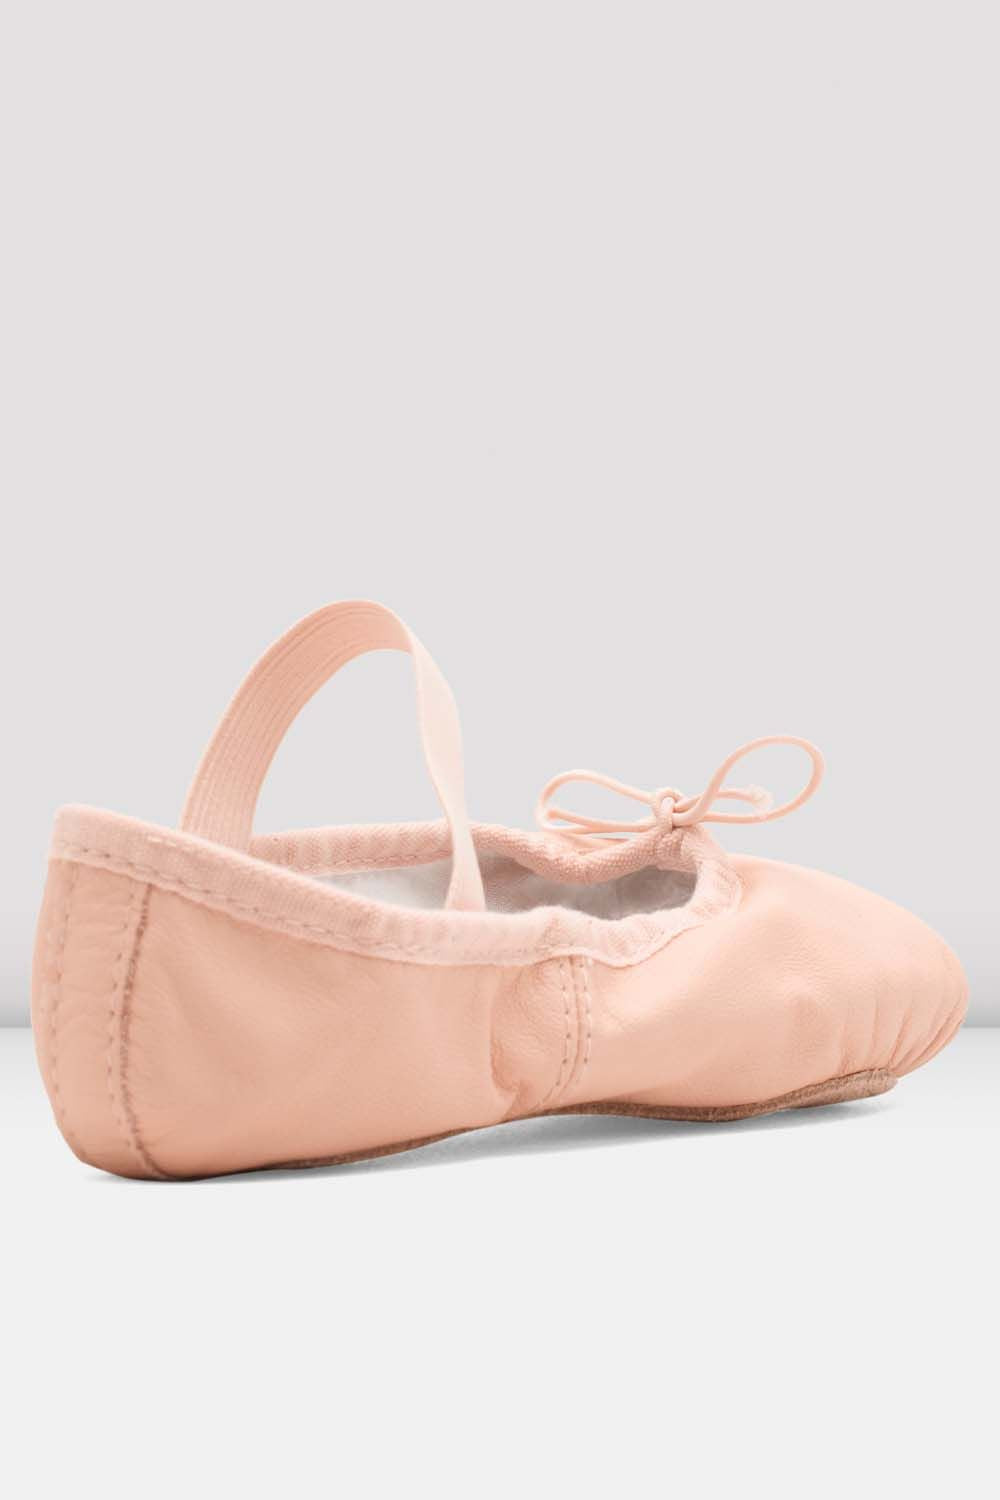 Heritage Long Length Pointe Shoes, Pink – BLOCH Dance US